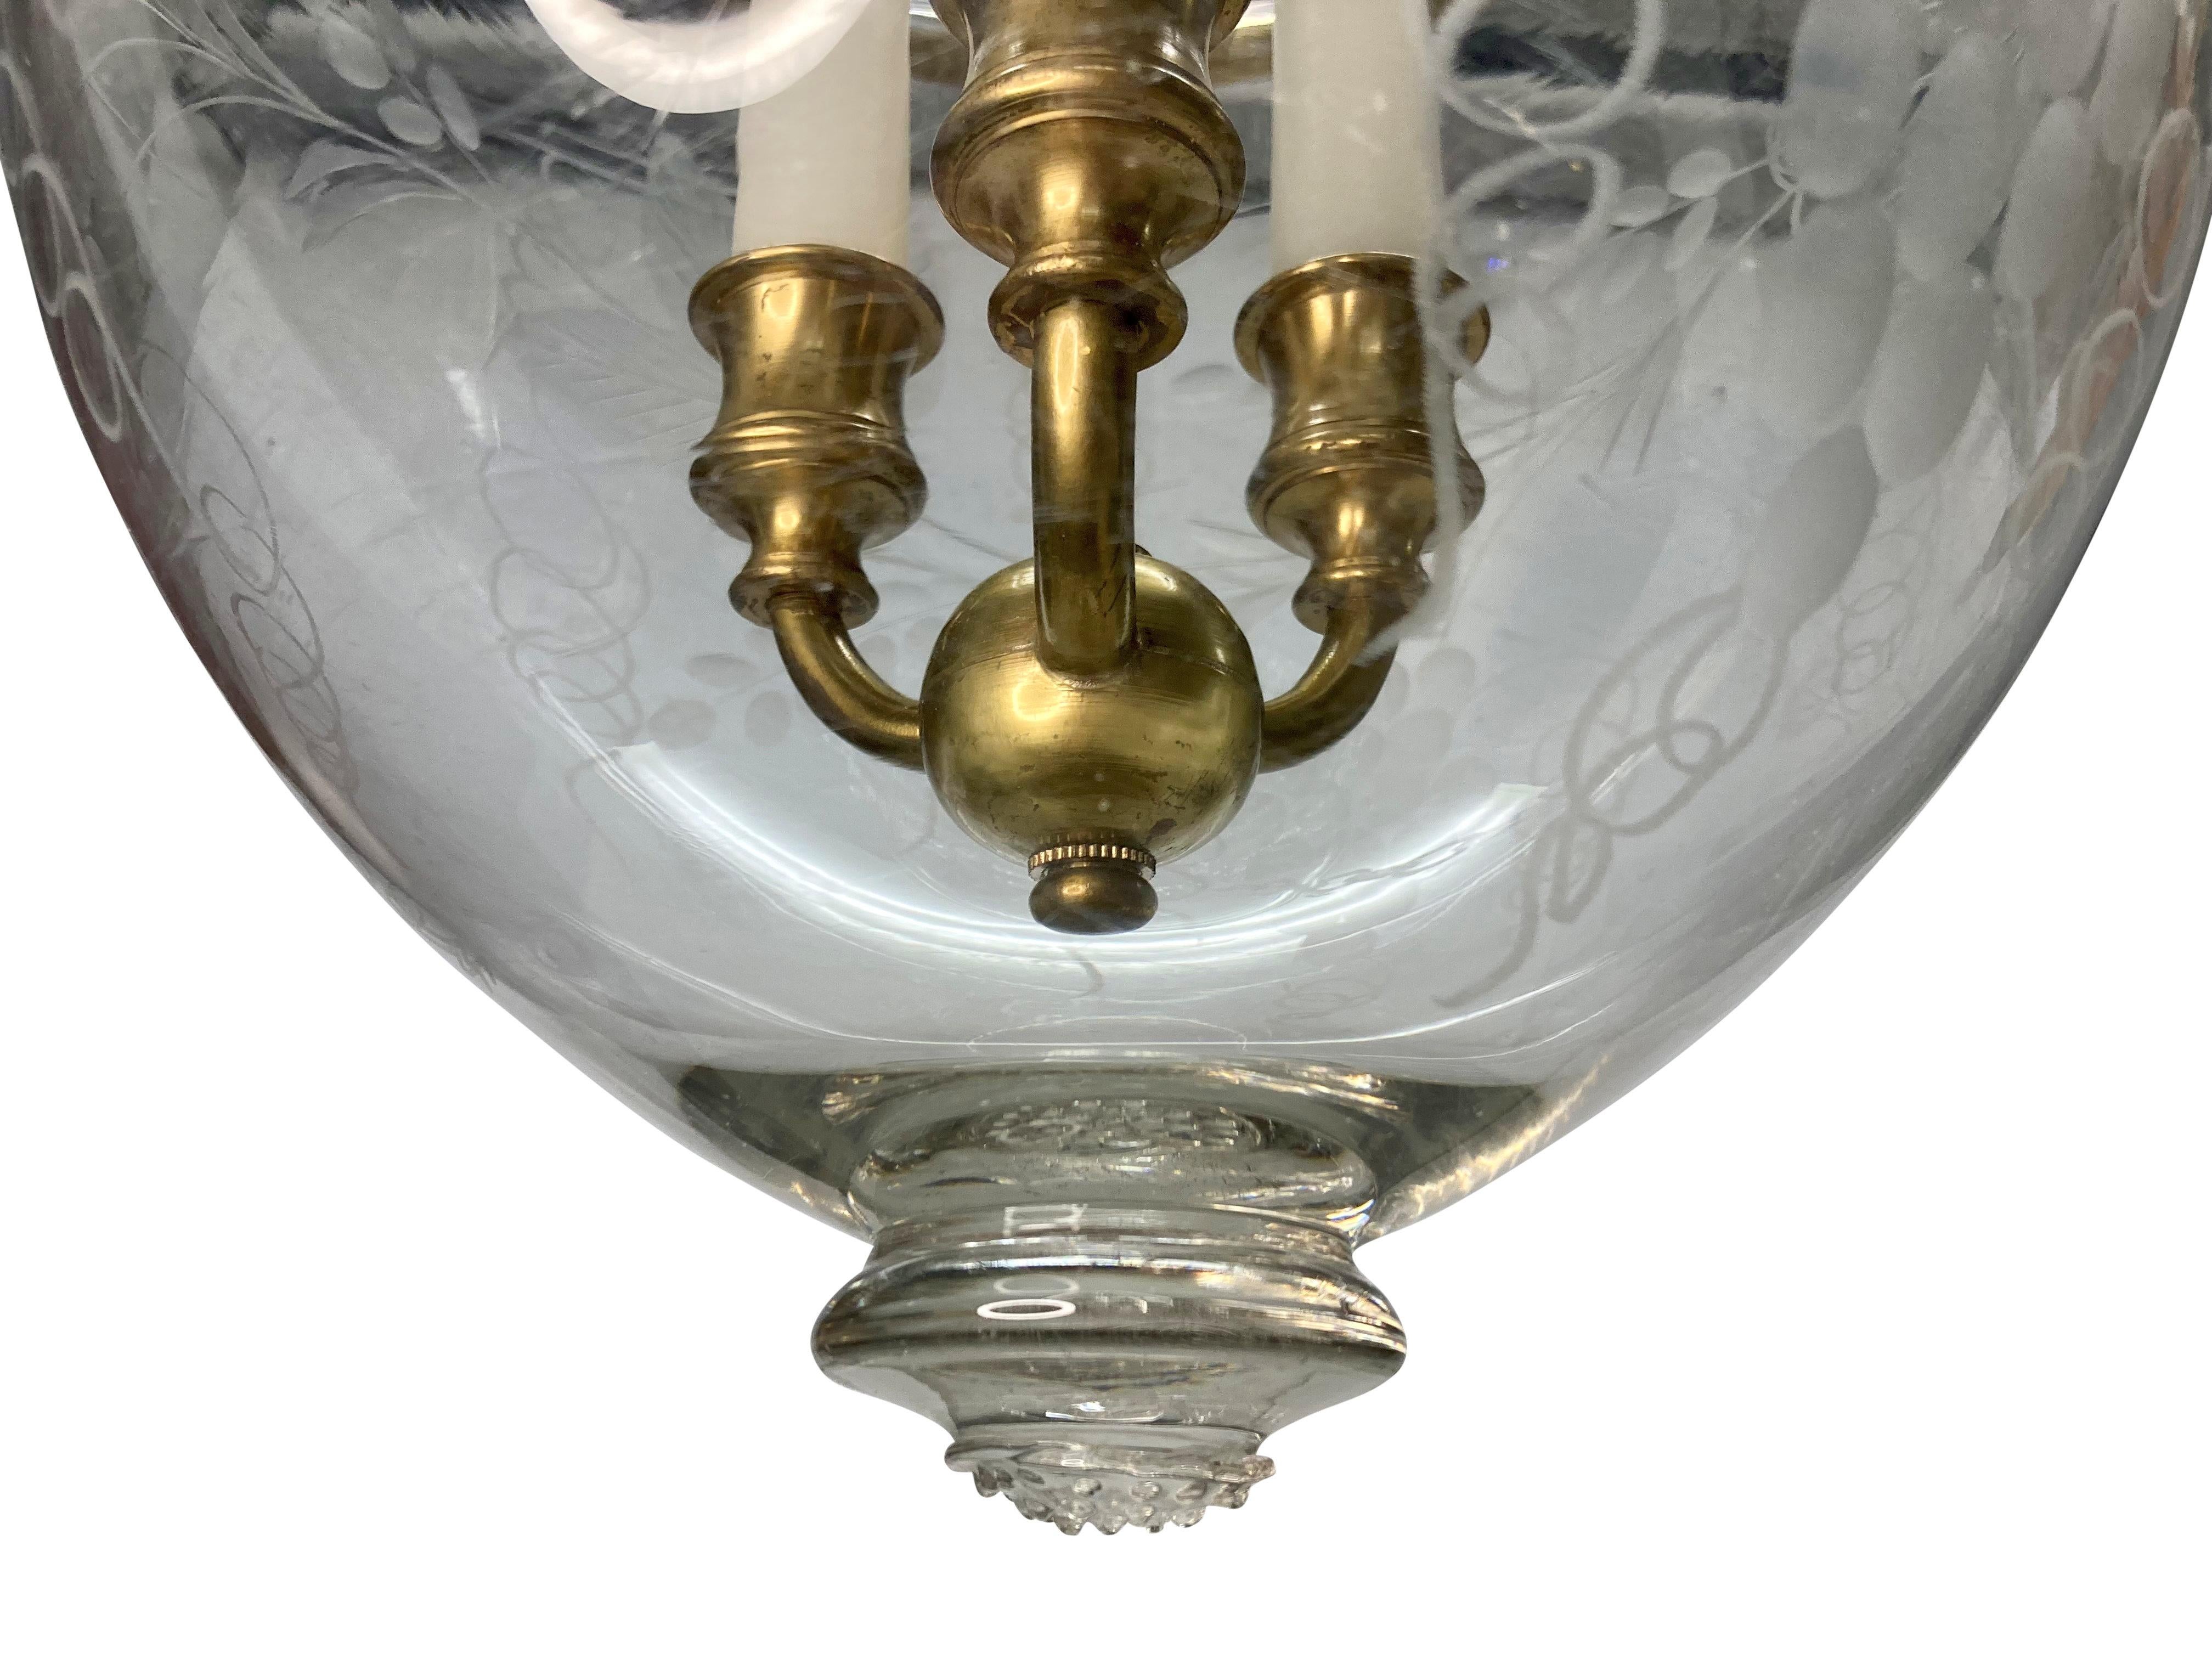 An English hand blown bell lantern, with an etched grape vine design, with brass fittings. The glass has a slight grey tinge due to the mercury content.